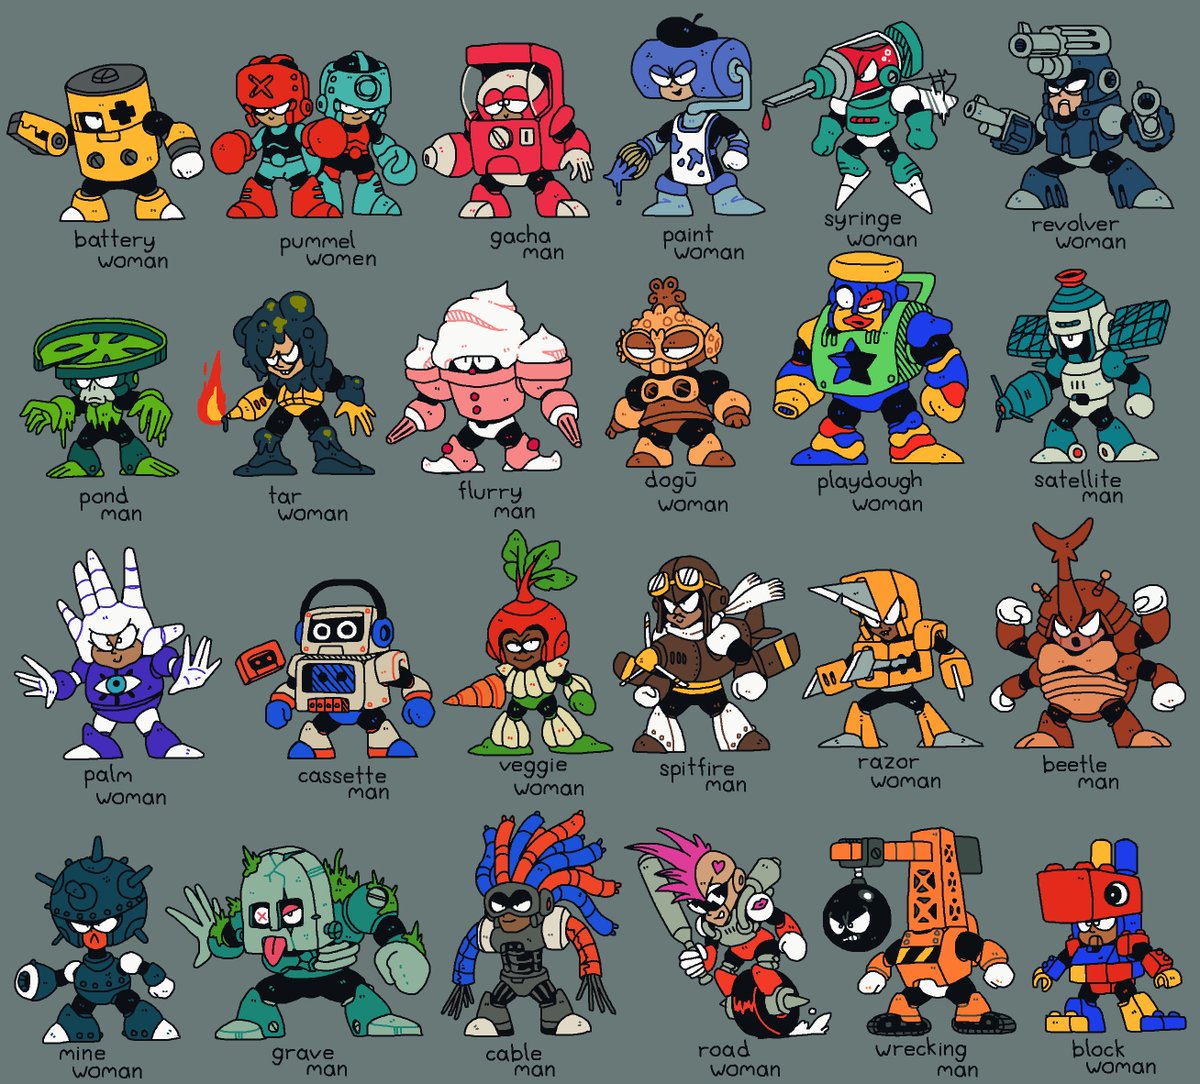 Samanthuel B L M Collection Of 24 Megaman Robot Masters I Ve Designed Read Their Descriptions Here T Co Akft5qdhwj Patreon T Co Dnrd2mggu5 T Co Hebtwar0tr